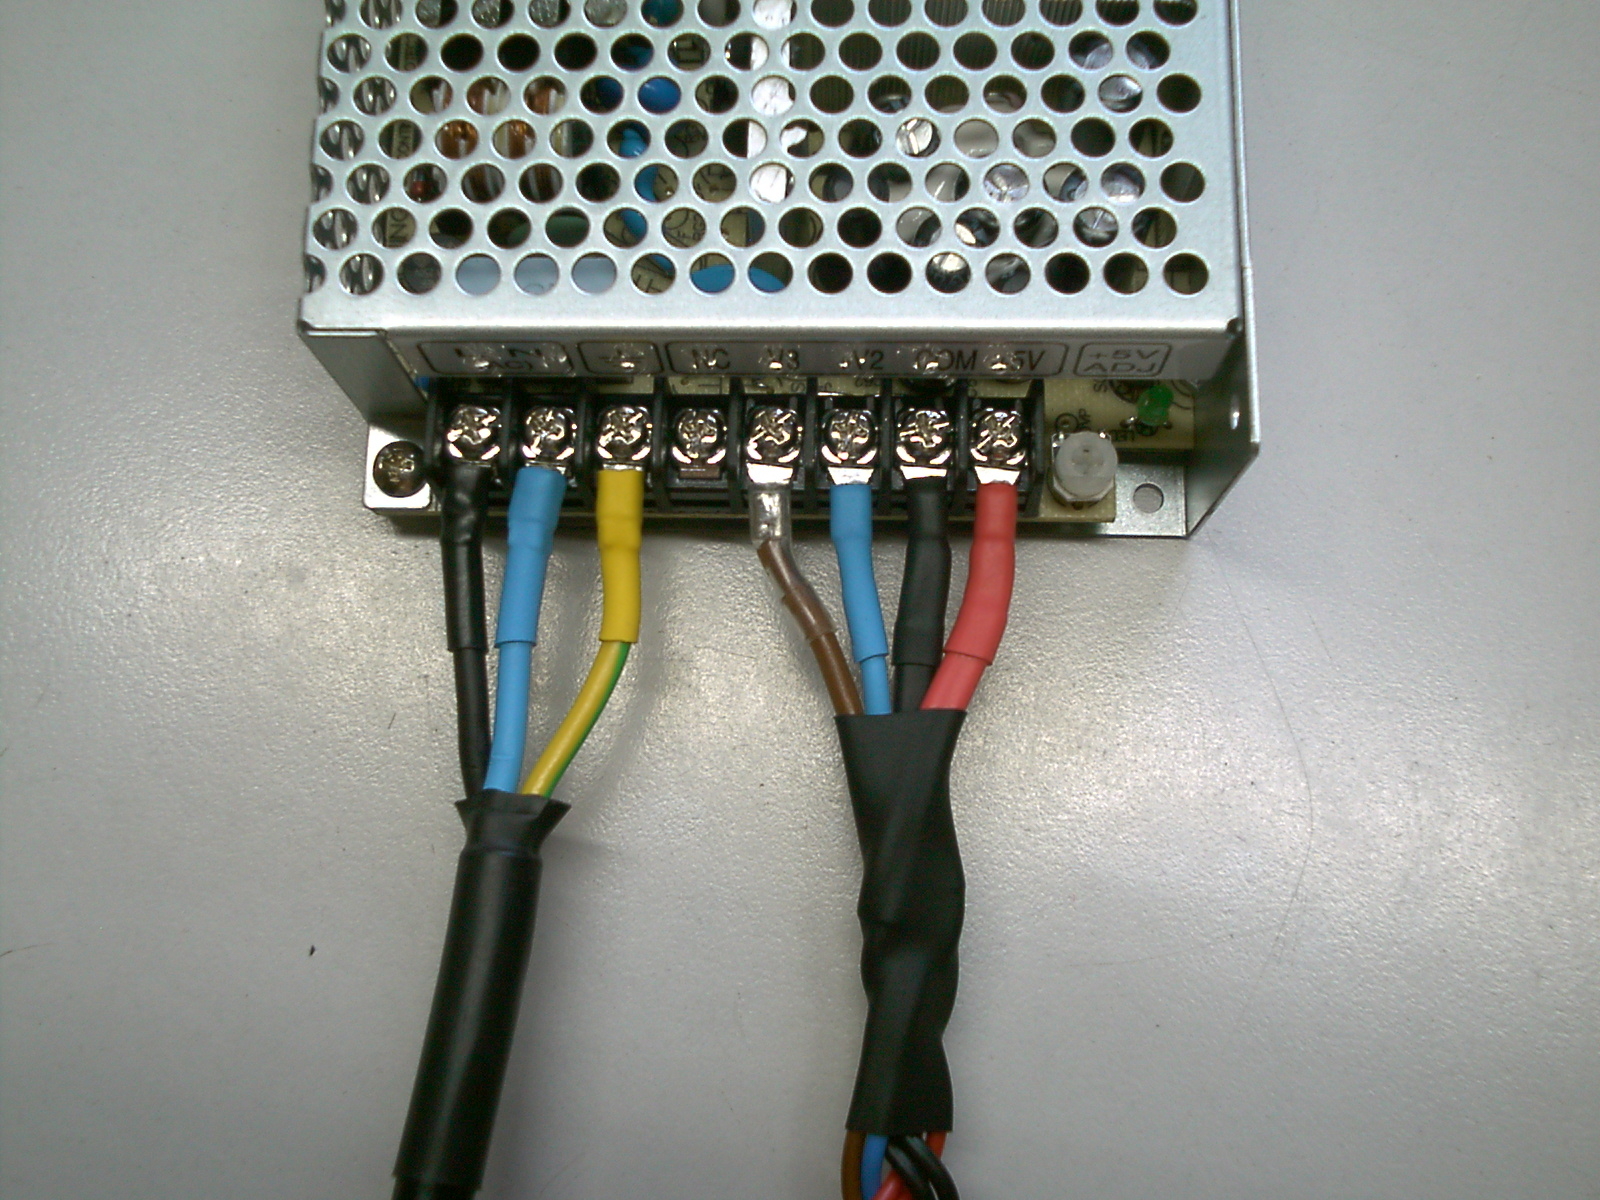 Connection to the switchmode power supply